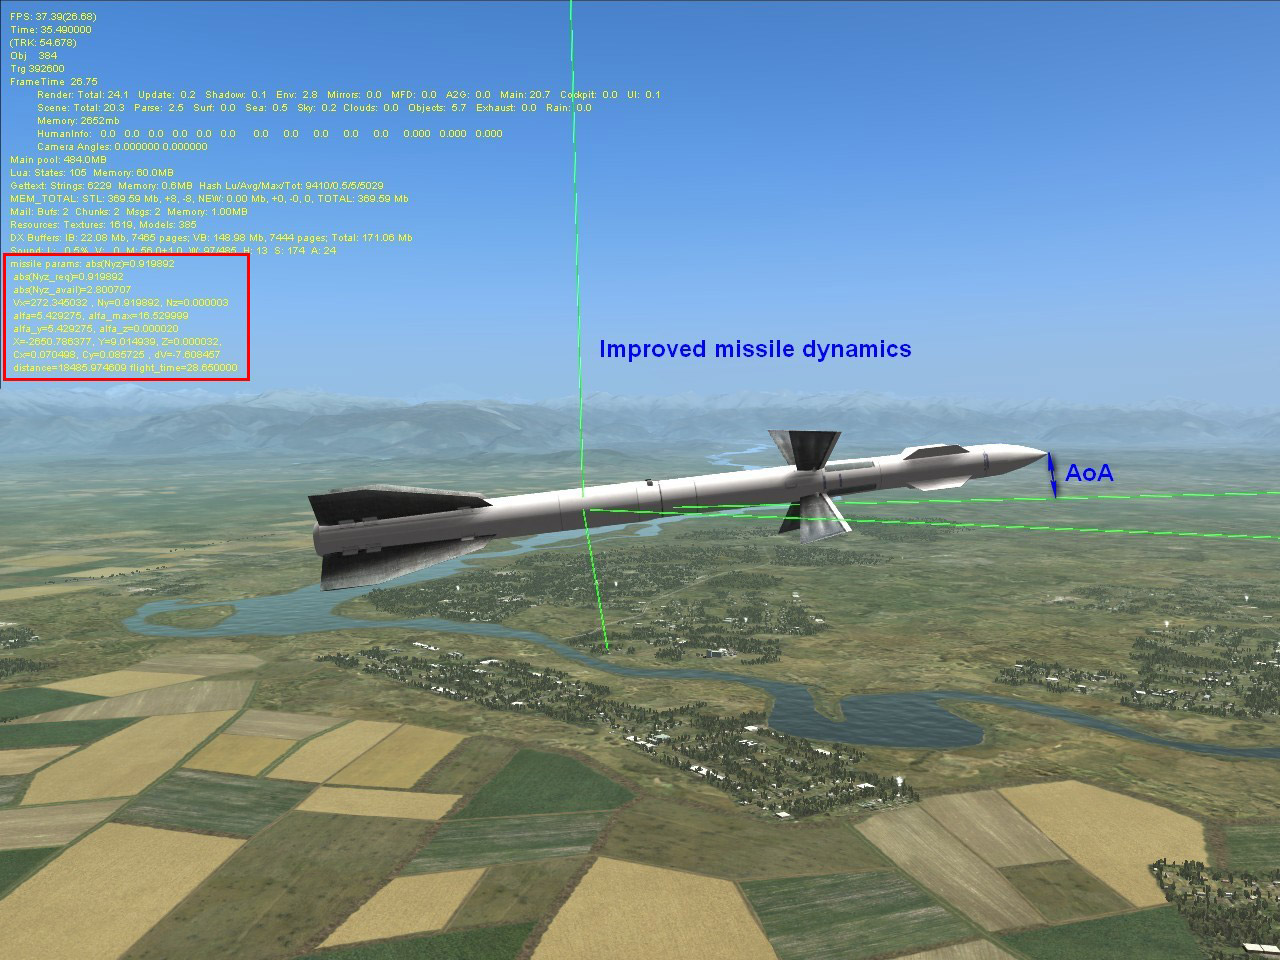 Improved Air-to-Air Missile Flight Dynamics